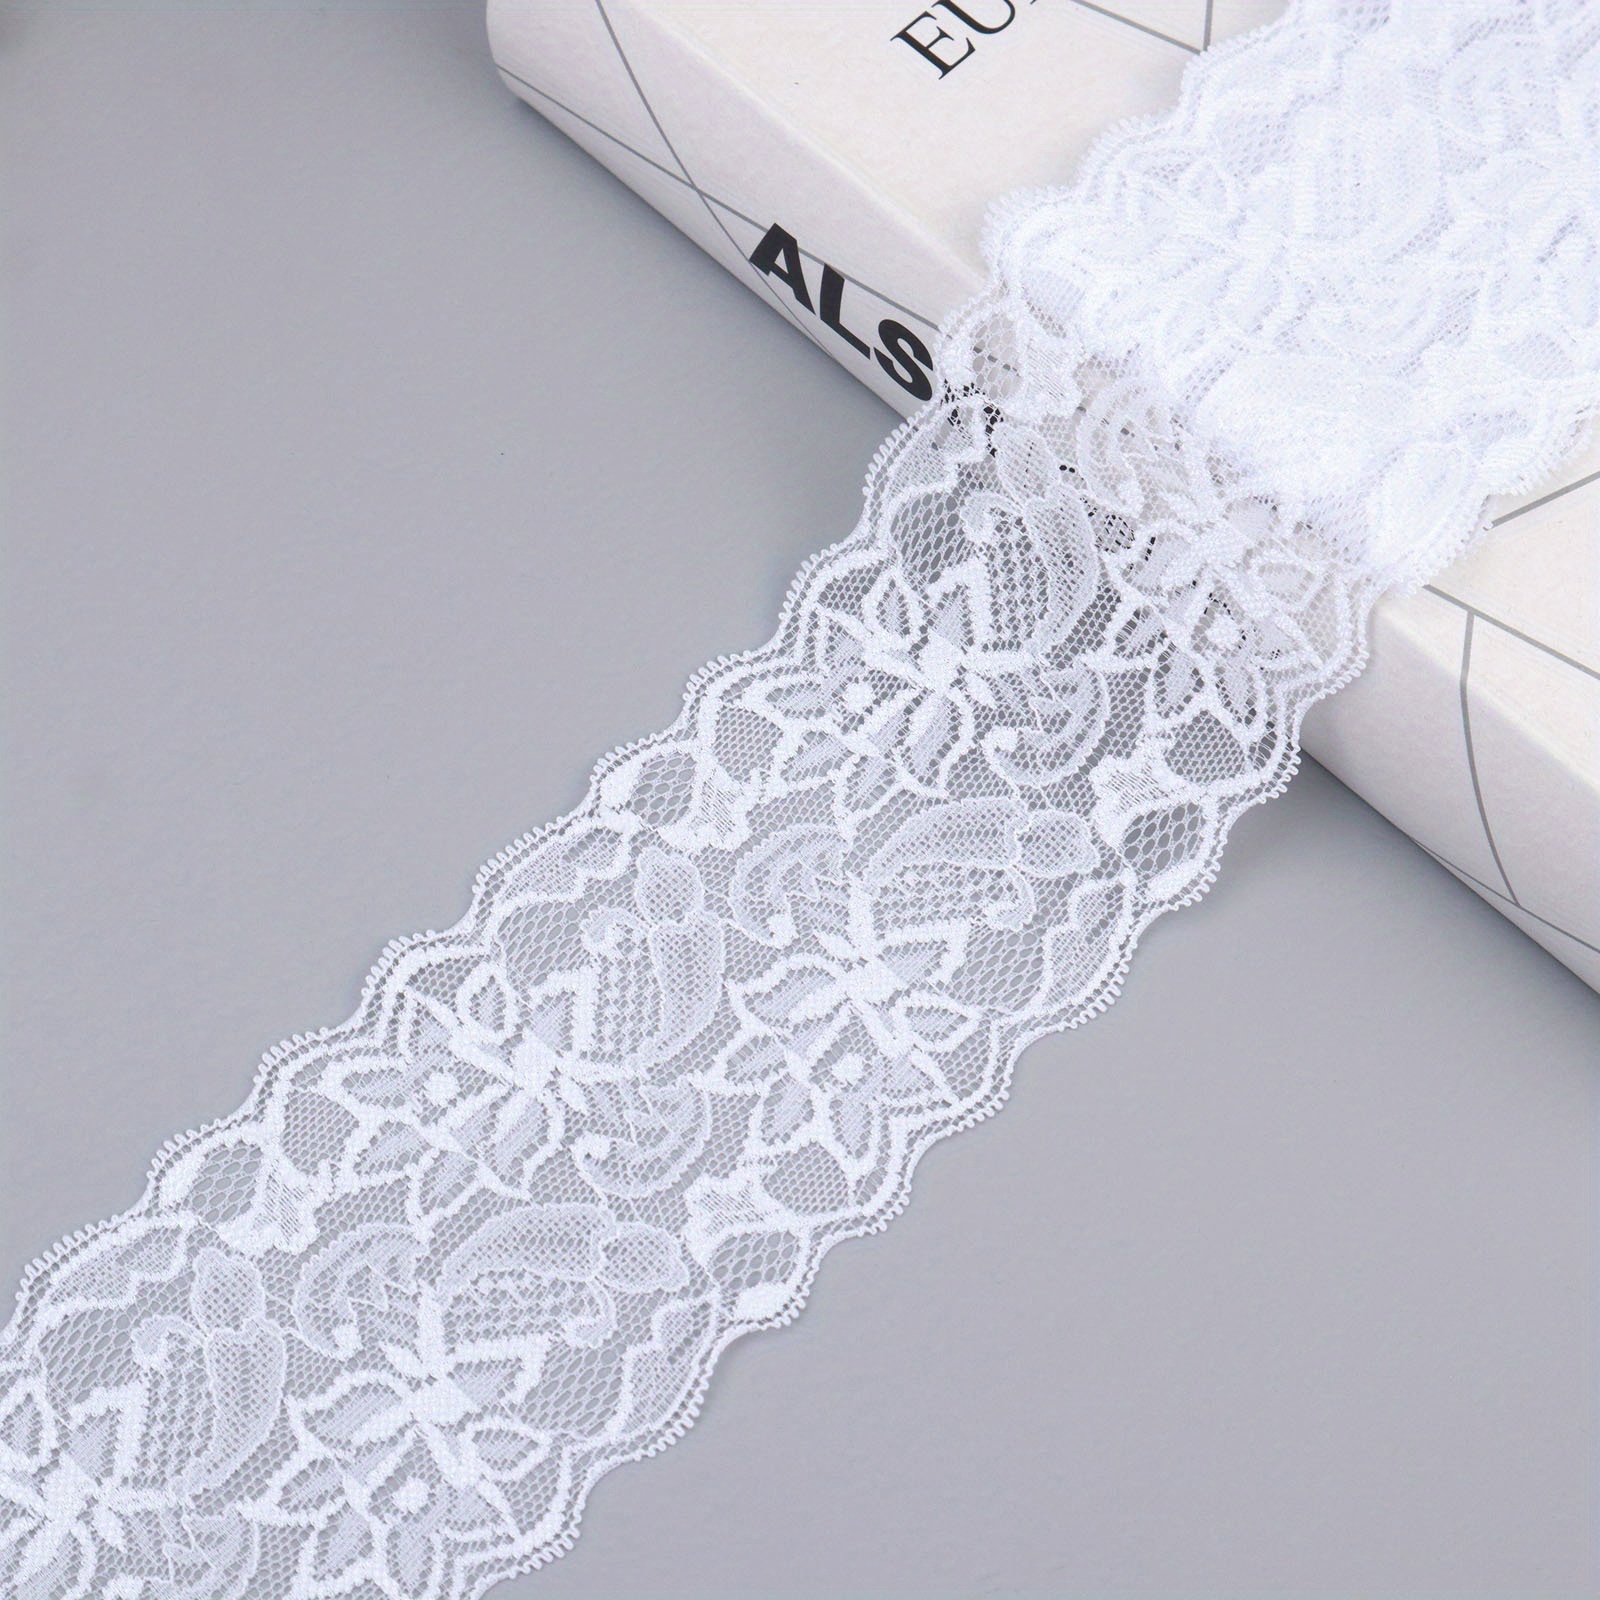 7 Wide White Lace Fabric Sewing Lace Ribbon Trim Elastic Stretchy